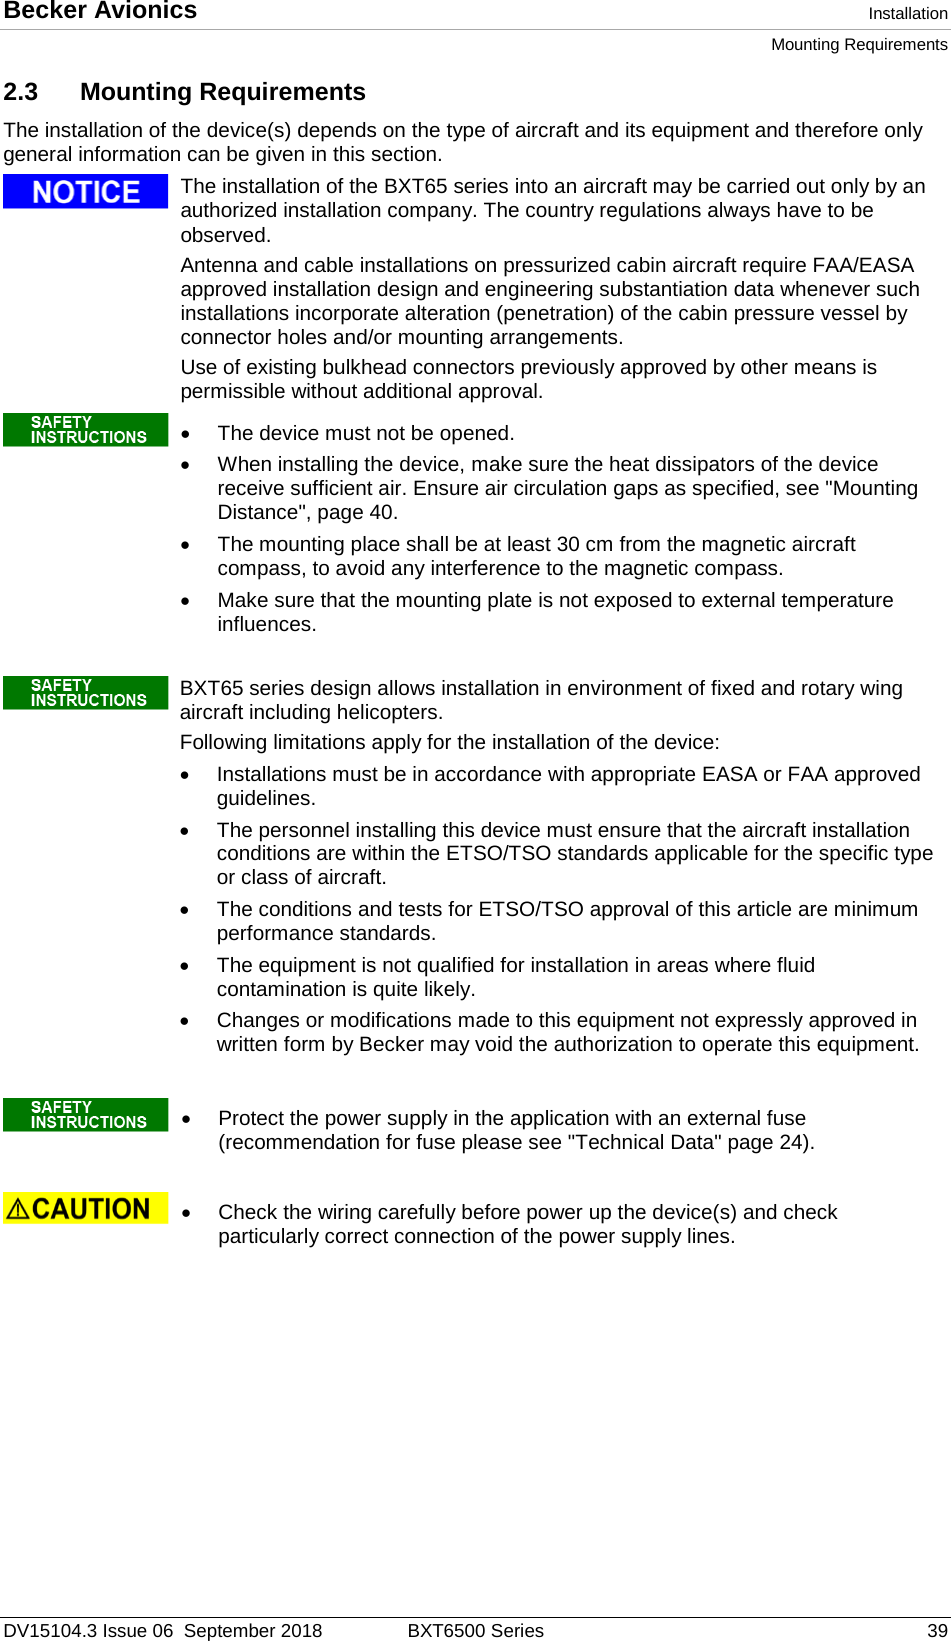 Becker Avionics  Installation Mounting Requirements  DV15104.3 Issue 06  September 2018 BXT6500 Series 39 2.3 Mounting Requirements The installation of the device(s) depends on the type of aircraft and its equipment and therefore only general information can be given in this section.    The installation of the BXT65 series into an aircraft may be carried out only by an authorized installation company. The country regulations always have to be observed. Antenna and cable installations on pressurized cabin aircraft require FAA/EASA approved installation design and engineering substantiation data whenever such installations incorporate alteration (penetration) of the cabin pressure vessel by connector holes and/or mounting arrangements.  Use of existing bulkhead connectors previously approved by other means is permissible without additional approval.    • The device must not be opened. • When installing the device, make sure the heat dissipators of the device receive sufficient air. Ensure air circulation gaps as specified, see &quot;Mounting Distance&quot;, page 40.  • The mounting place shall be at least 30 cm from the magnetic aircraft compass, to avoid any interference to the magnetic compass. • Make sure that the mounting plate is not exposed to external temperature influences.     BXT65 series design allows installation in environment of fixed and rotary wing aircraft including helicopters.  Following limitations apply for the installation of the device: • Installations must be in accordance with appropriate EASA or FAA approved guidelines.  • The personnel installing this device must ensure that the aircraft installation conditions are within the ETSO/TSO standards applicable for the specific type or class of aircraft. • The conditions and tests for ETSO/TSO approval of this article are minimum performance standards.  • The equipment is not qualified for installation in areas where fluid contamination is quite likely. • Changes or modifications made to this equipment not expressly approved in written form by Becker may void the authorization to operate this equipment.      • Protect the power supply in the application with an external fuse (recommendation for fuse please see &quot;Technical Data&quot; page 24).    • Check the wiring carefully before power up the device(s) and check particularly correct connection of the power supply lines.      